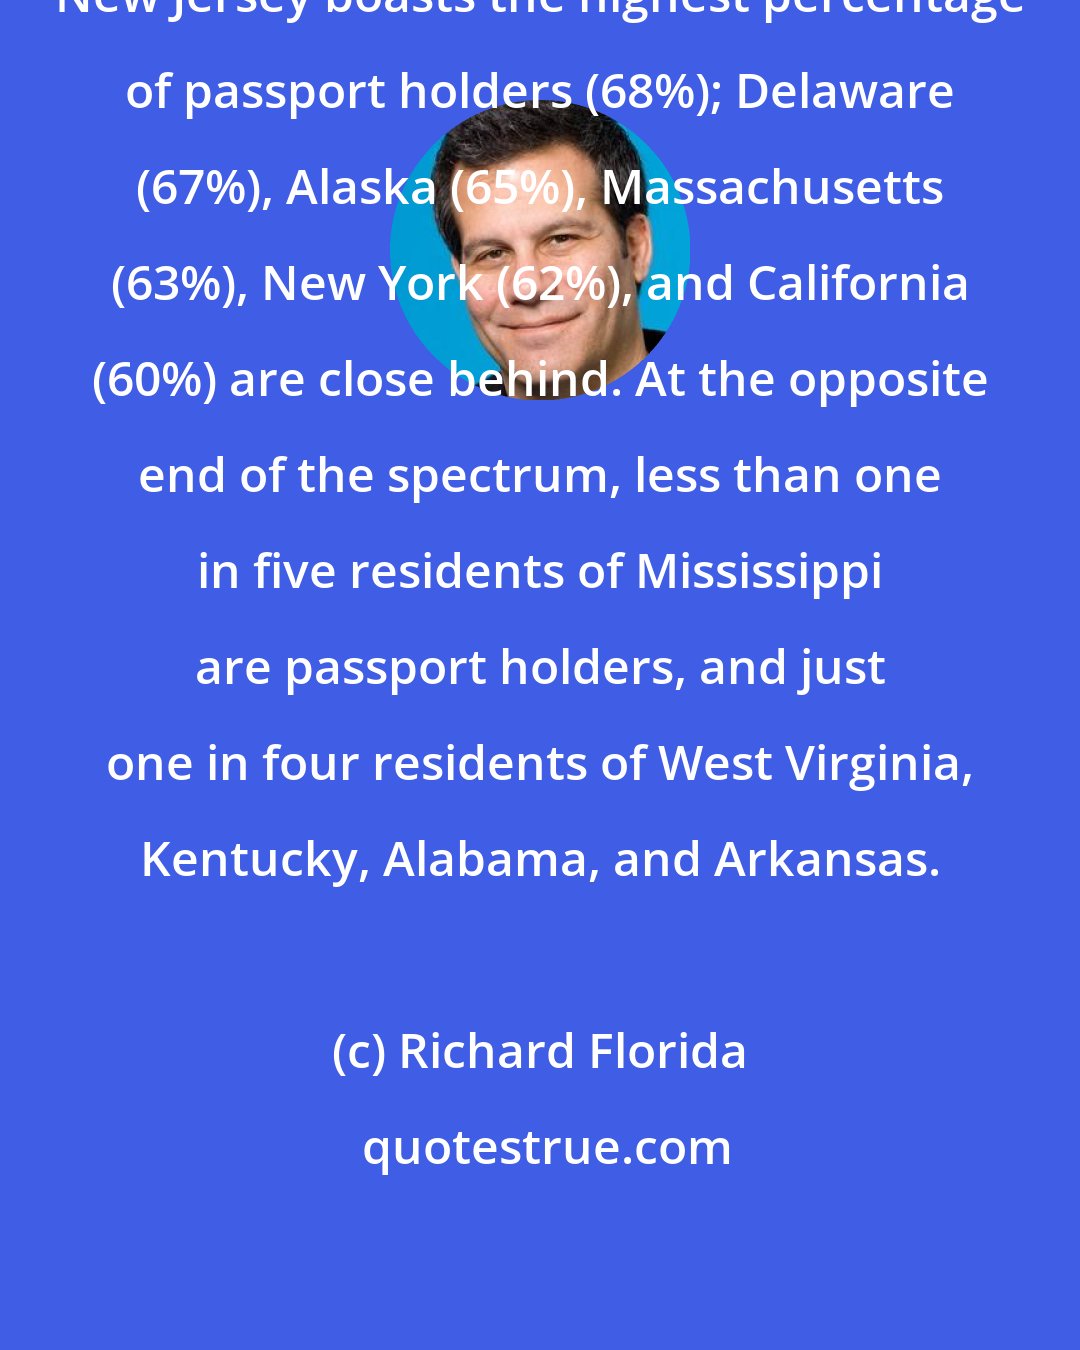 Richard Florida: New Jersey boasts the highest percentage of passport holders (68%); Delaware (67%), Alaska (65%), Massachusetts (63%), New York (62%), and California (60%) are close behind. At the opposite end of the spectrum, less than one in five residents of Mississippi are passport holders, and just one in four residents of West Virginia, Kentucky, Alabama, and Arkansas.